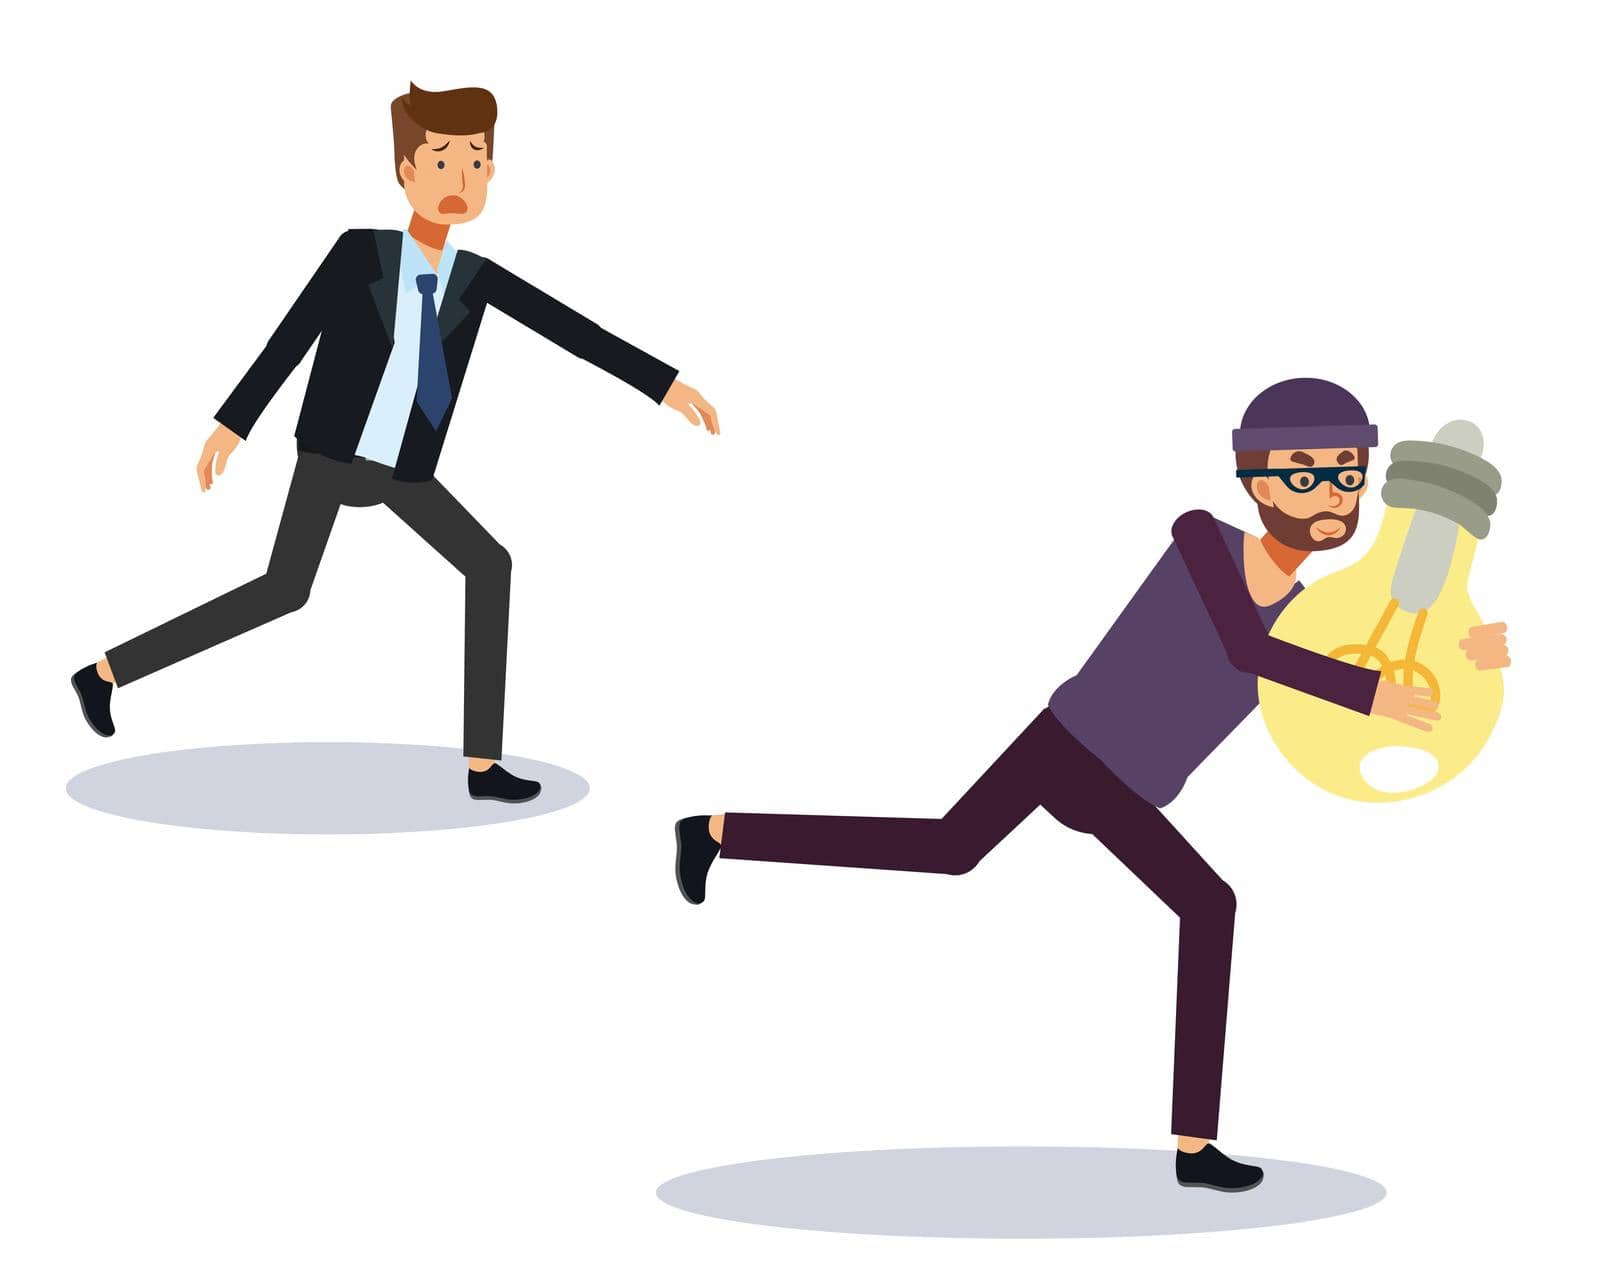 Thief stealing Idea from businessman. Flat Vector cartoon character, business concept by reyzestful